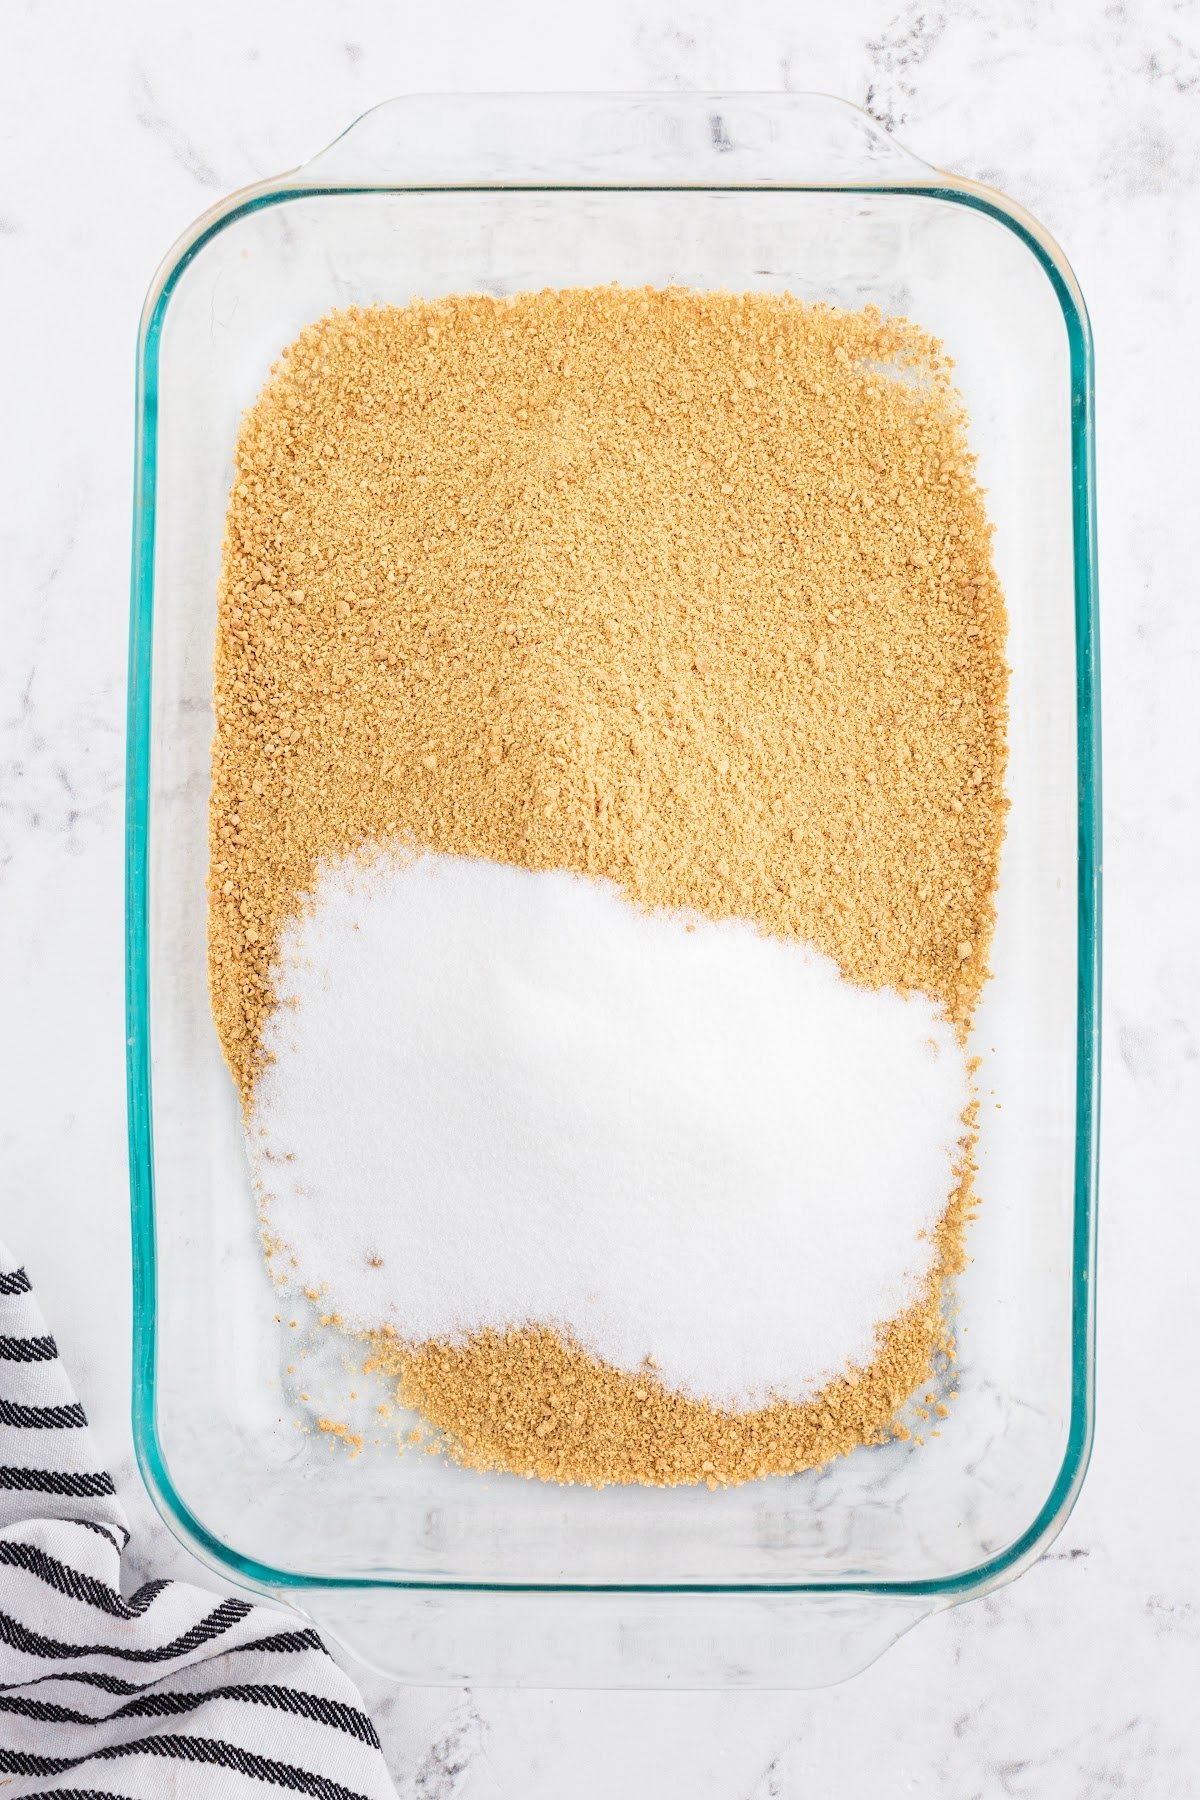 Graham cracker crumbs and sugar in the bottom of a baking dish.